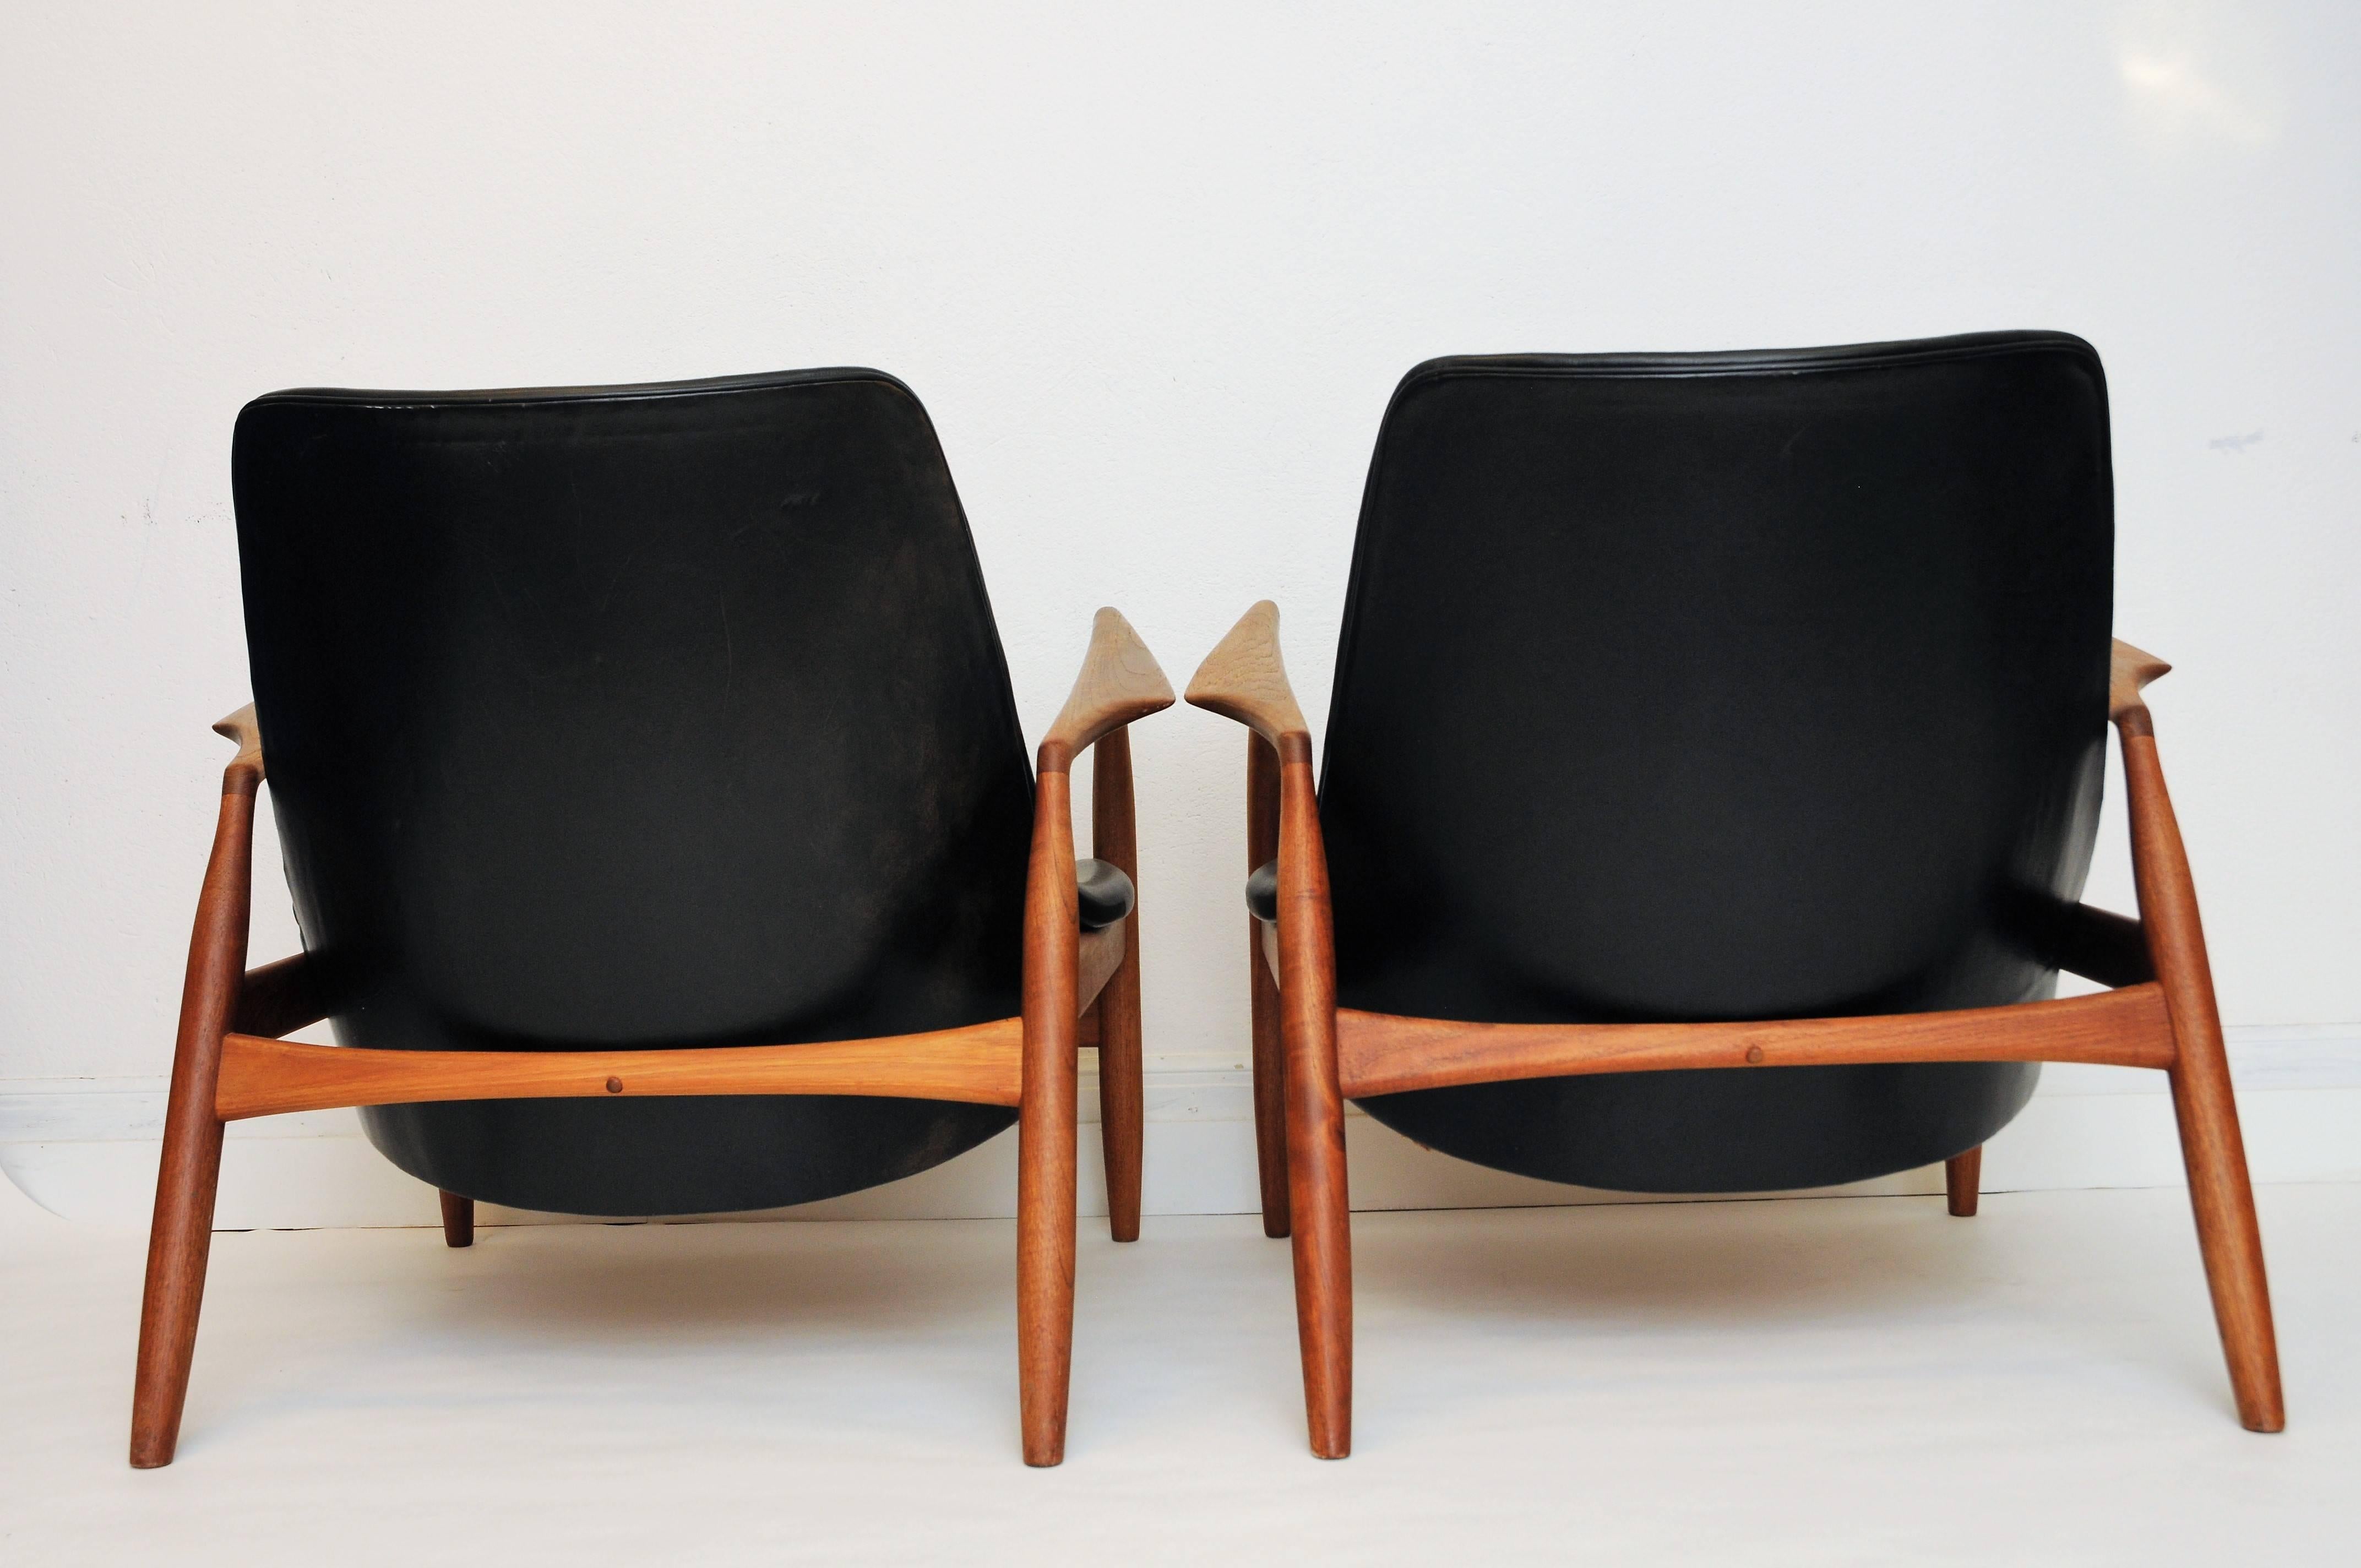 Scandinavian Modern Pair of Sälen/Seal Easy Chairs by Ib Kofod-Larsen for OPE 1957, Set of Two